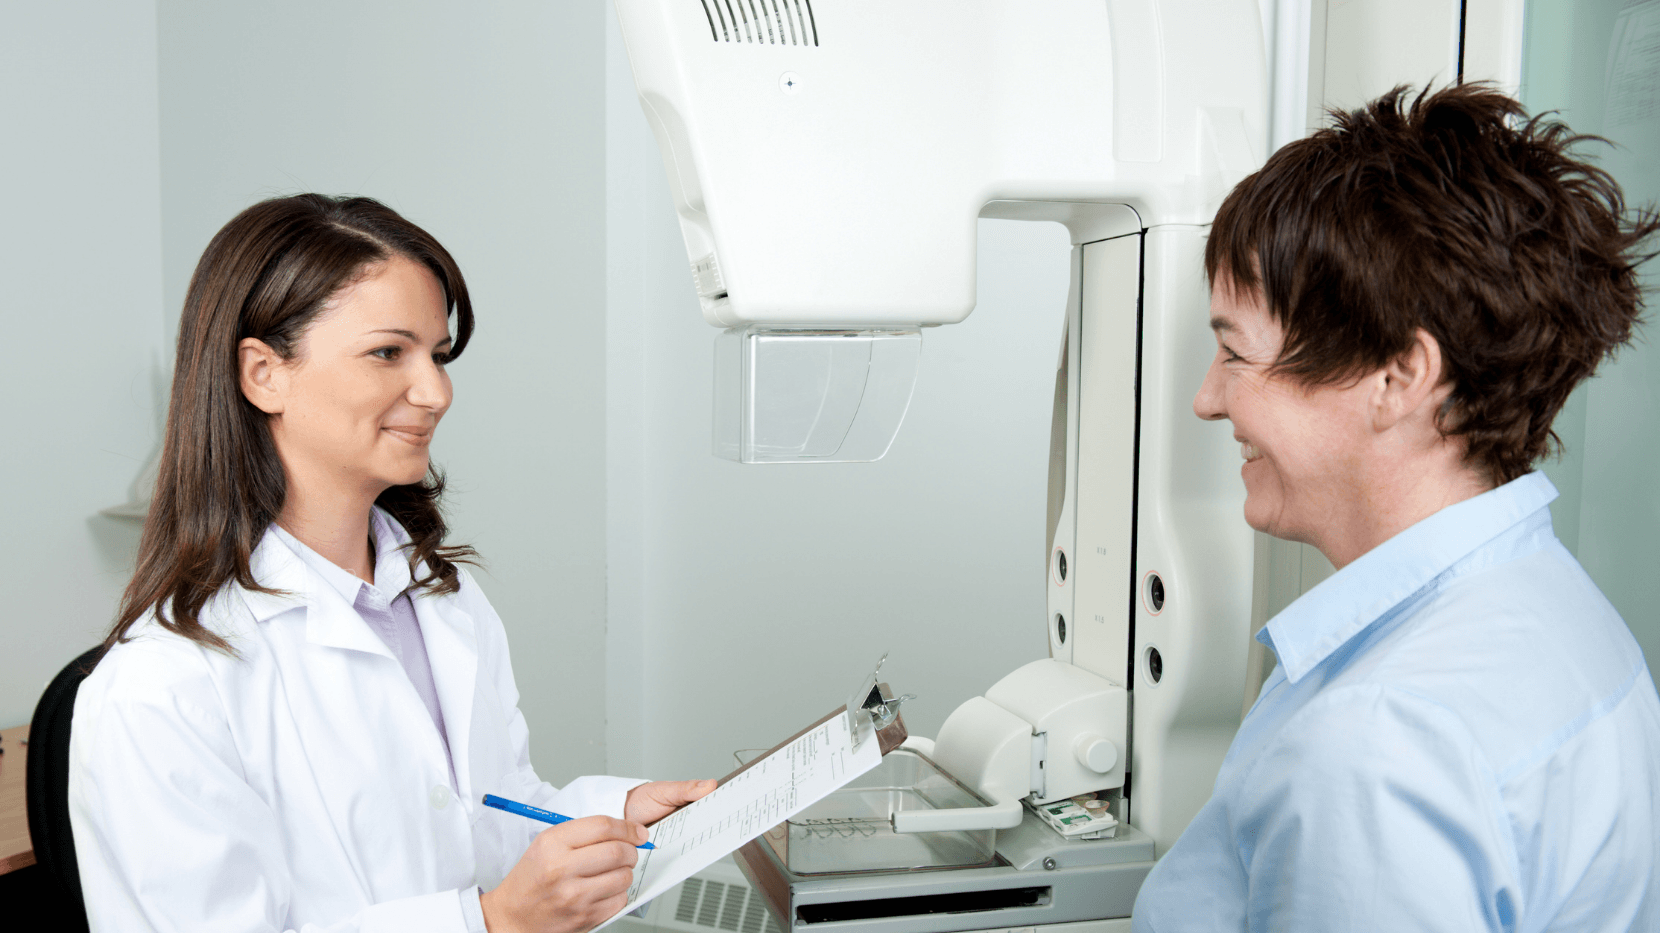 A Patient preparing for a Mammogram with her doctor